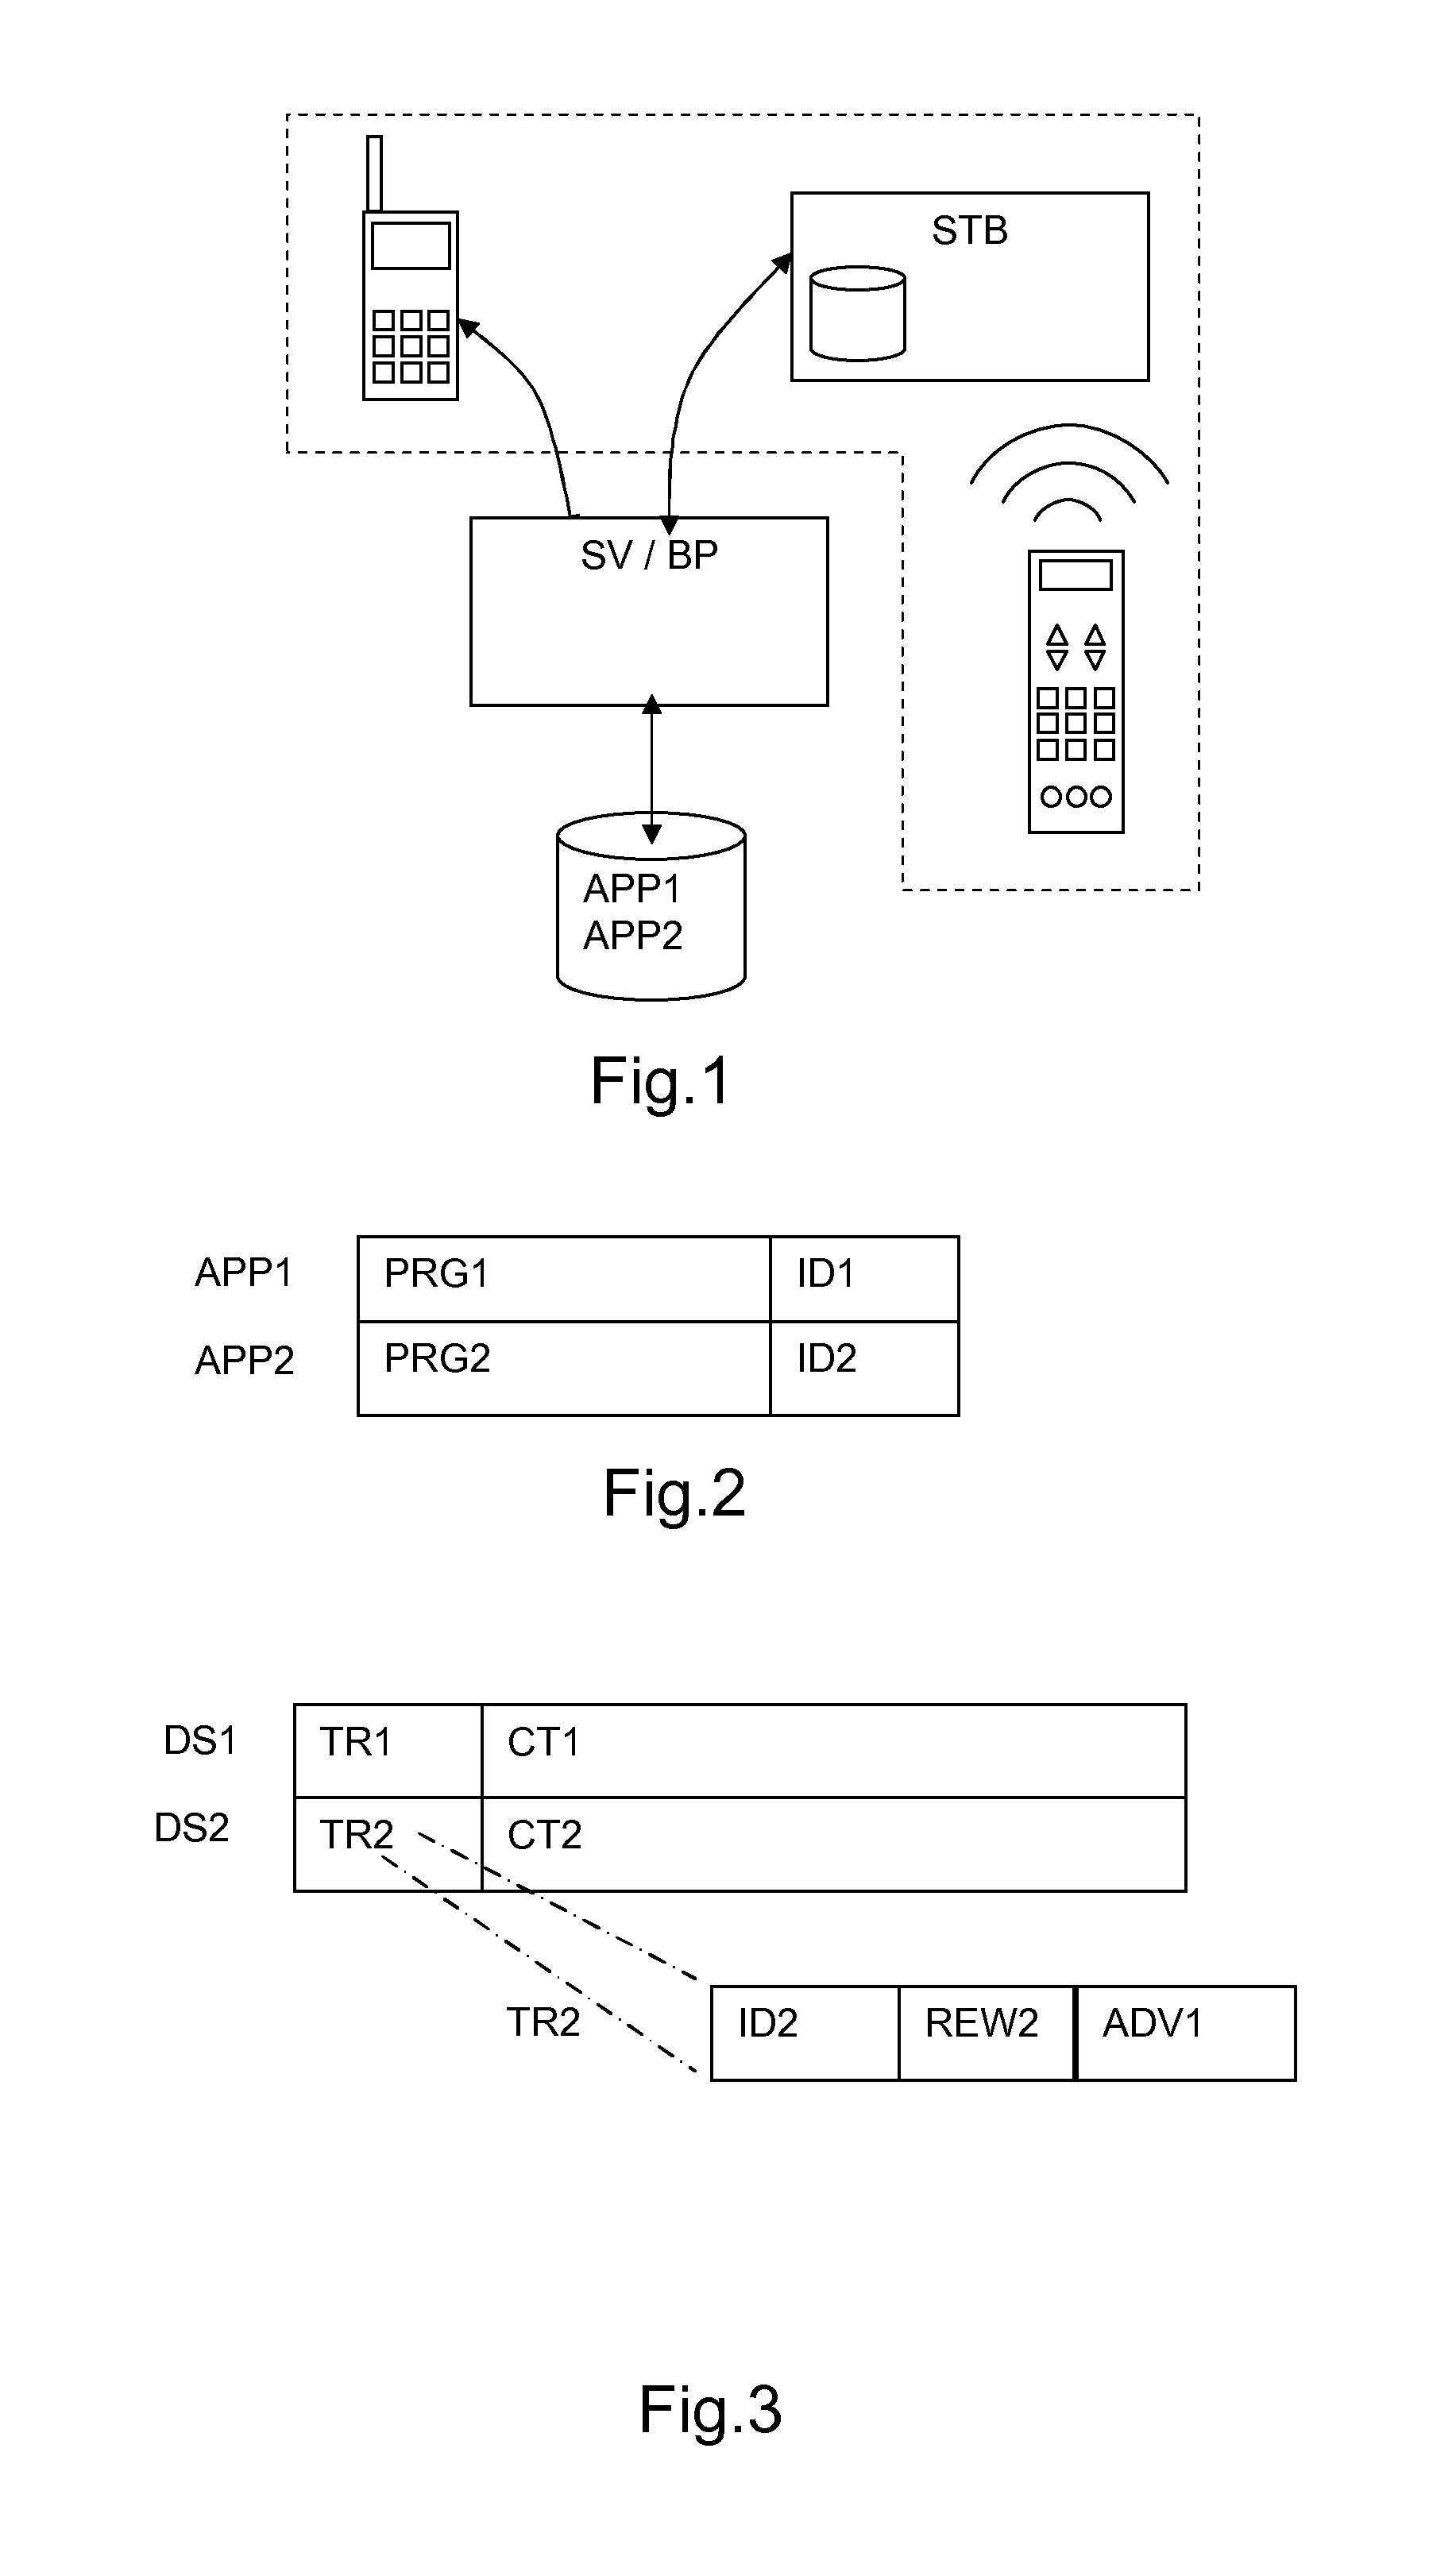 Method for accessing goods or services following an action performed by a viewer of broadcast program content